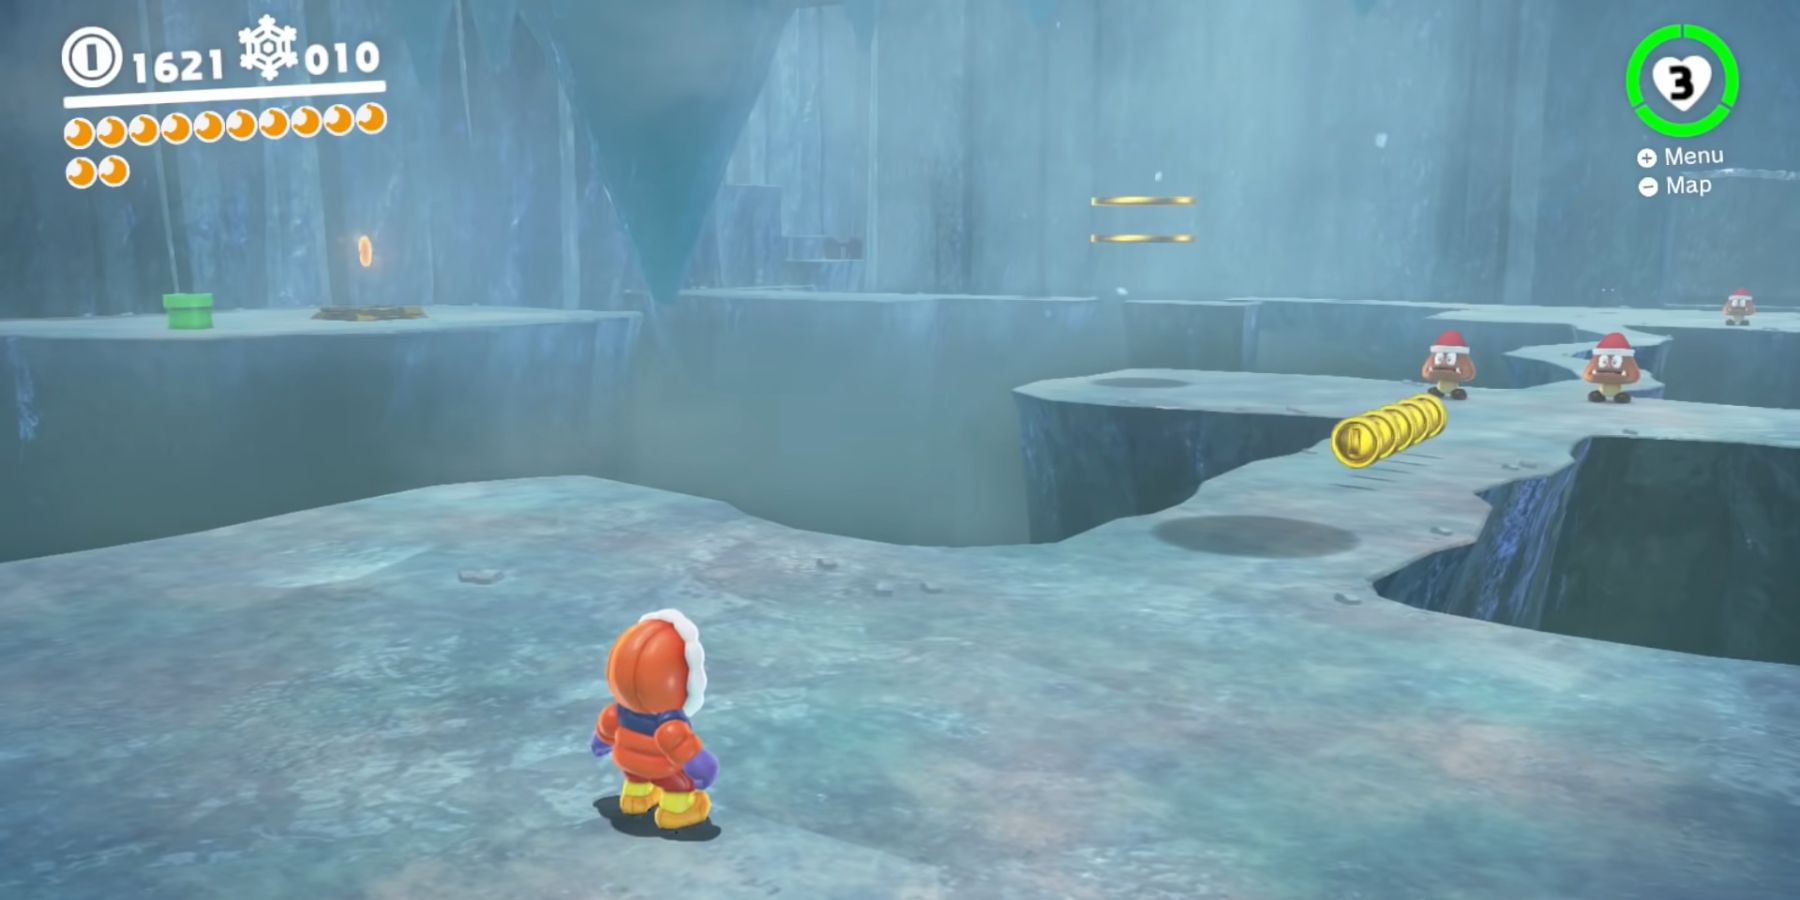 Mario entering the icicle caverns in the Snow Kingdom in Super Mario Odyssey